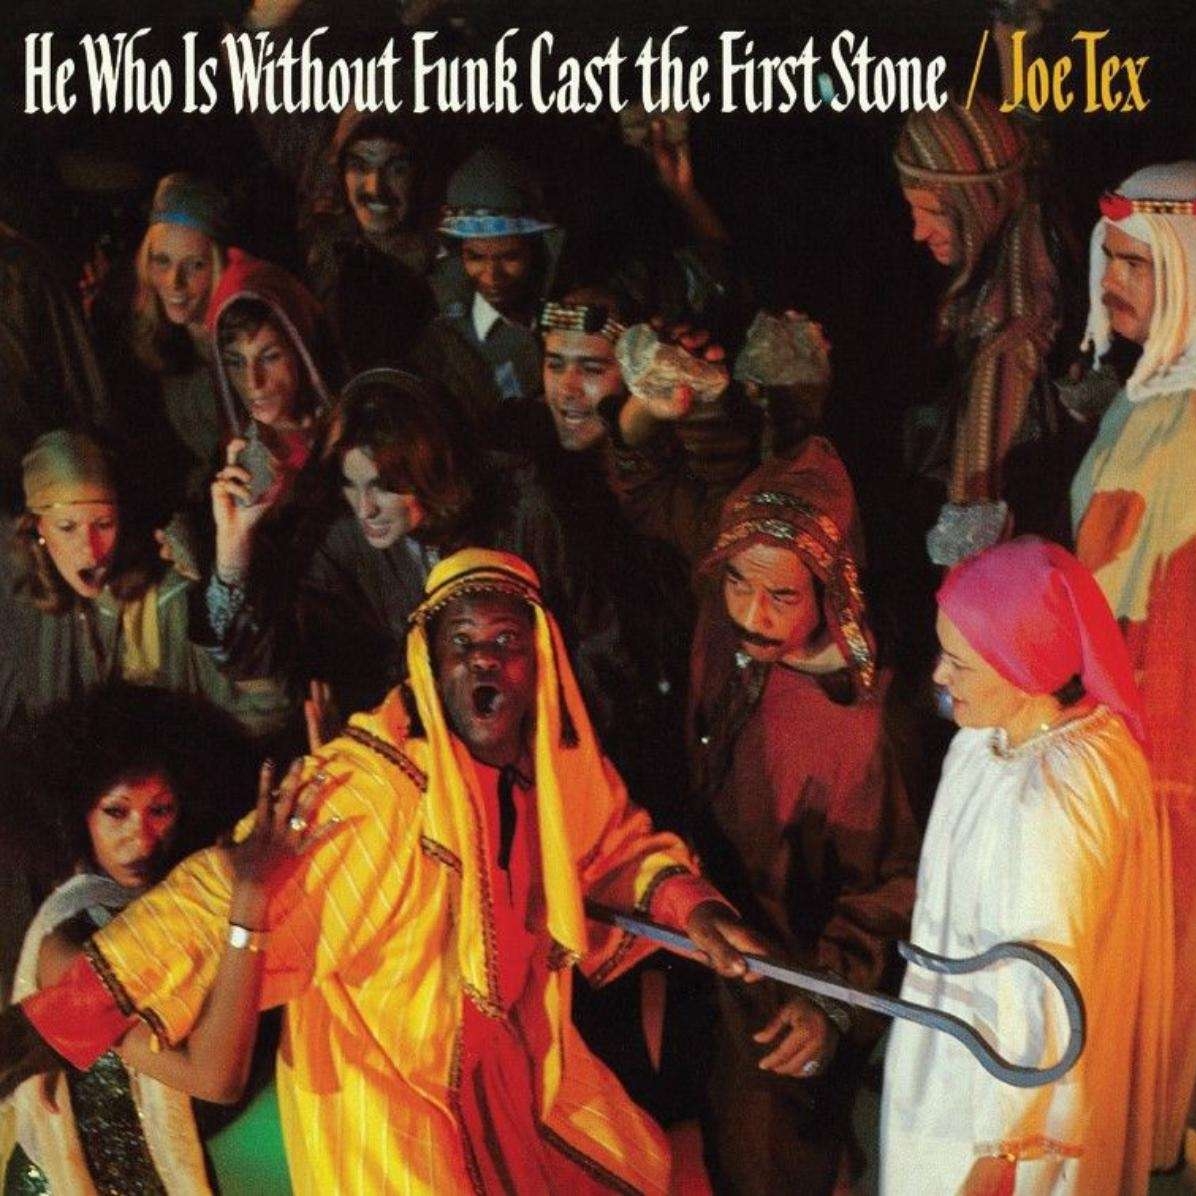 audio review : He Who Is Without Funk Cast The First Stone ( album ) ... Joe Tex